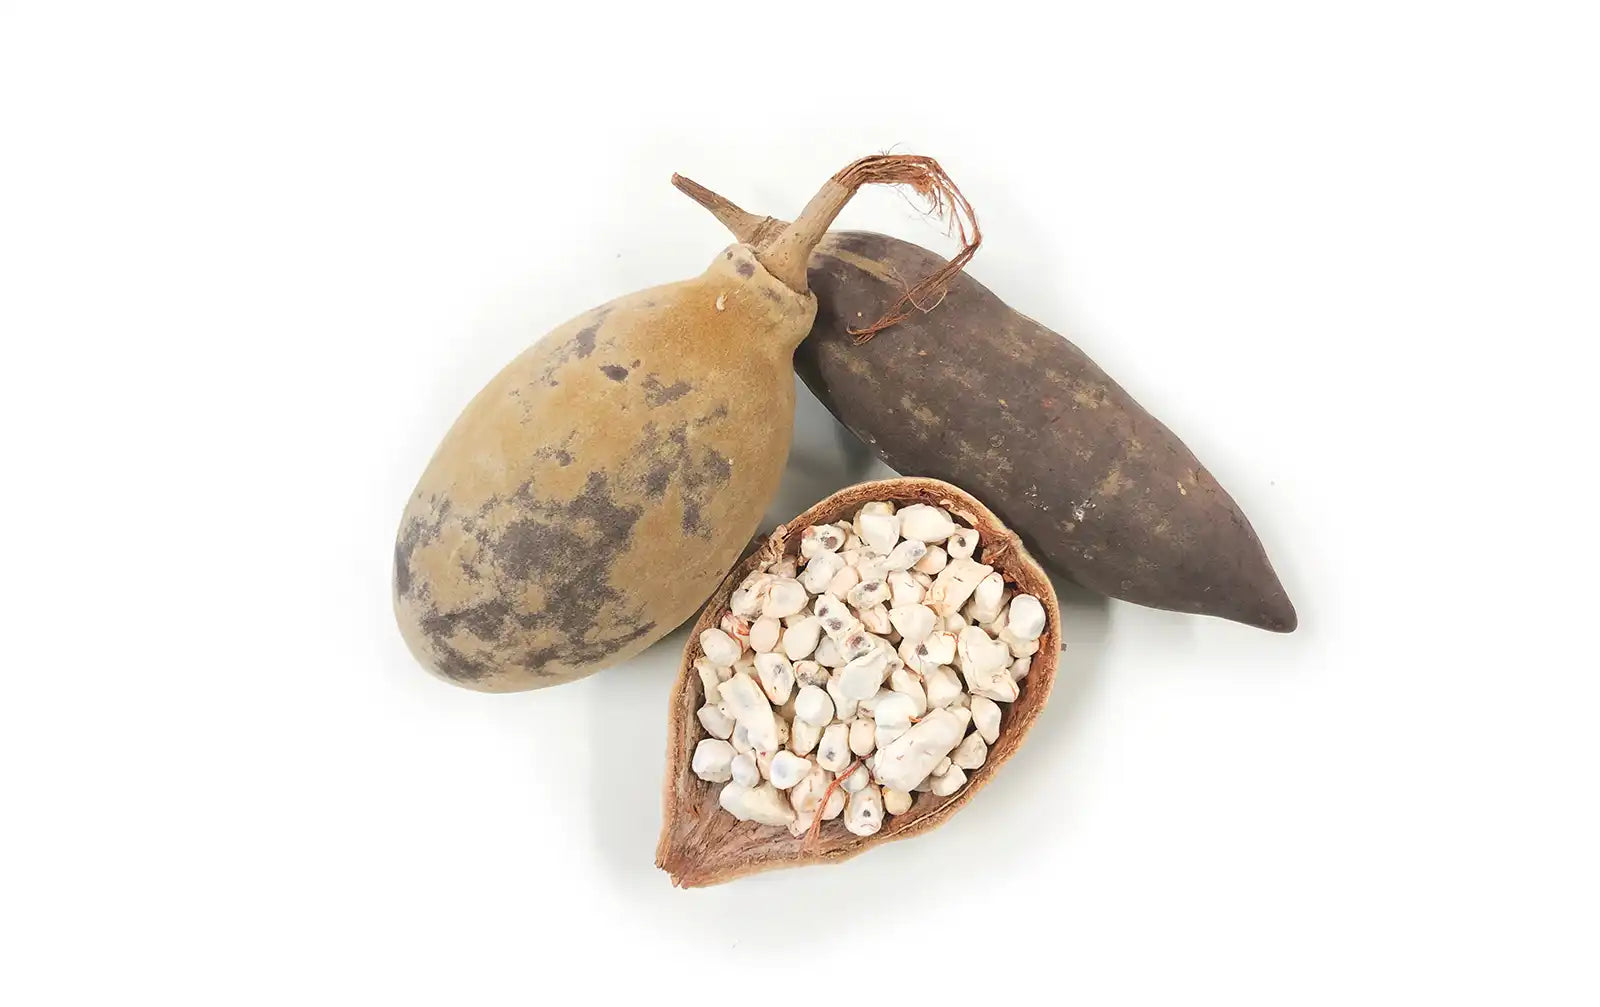 stock photo of baobab fruit and seeds